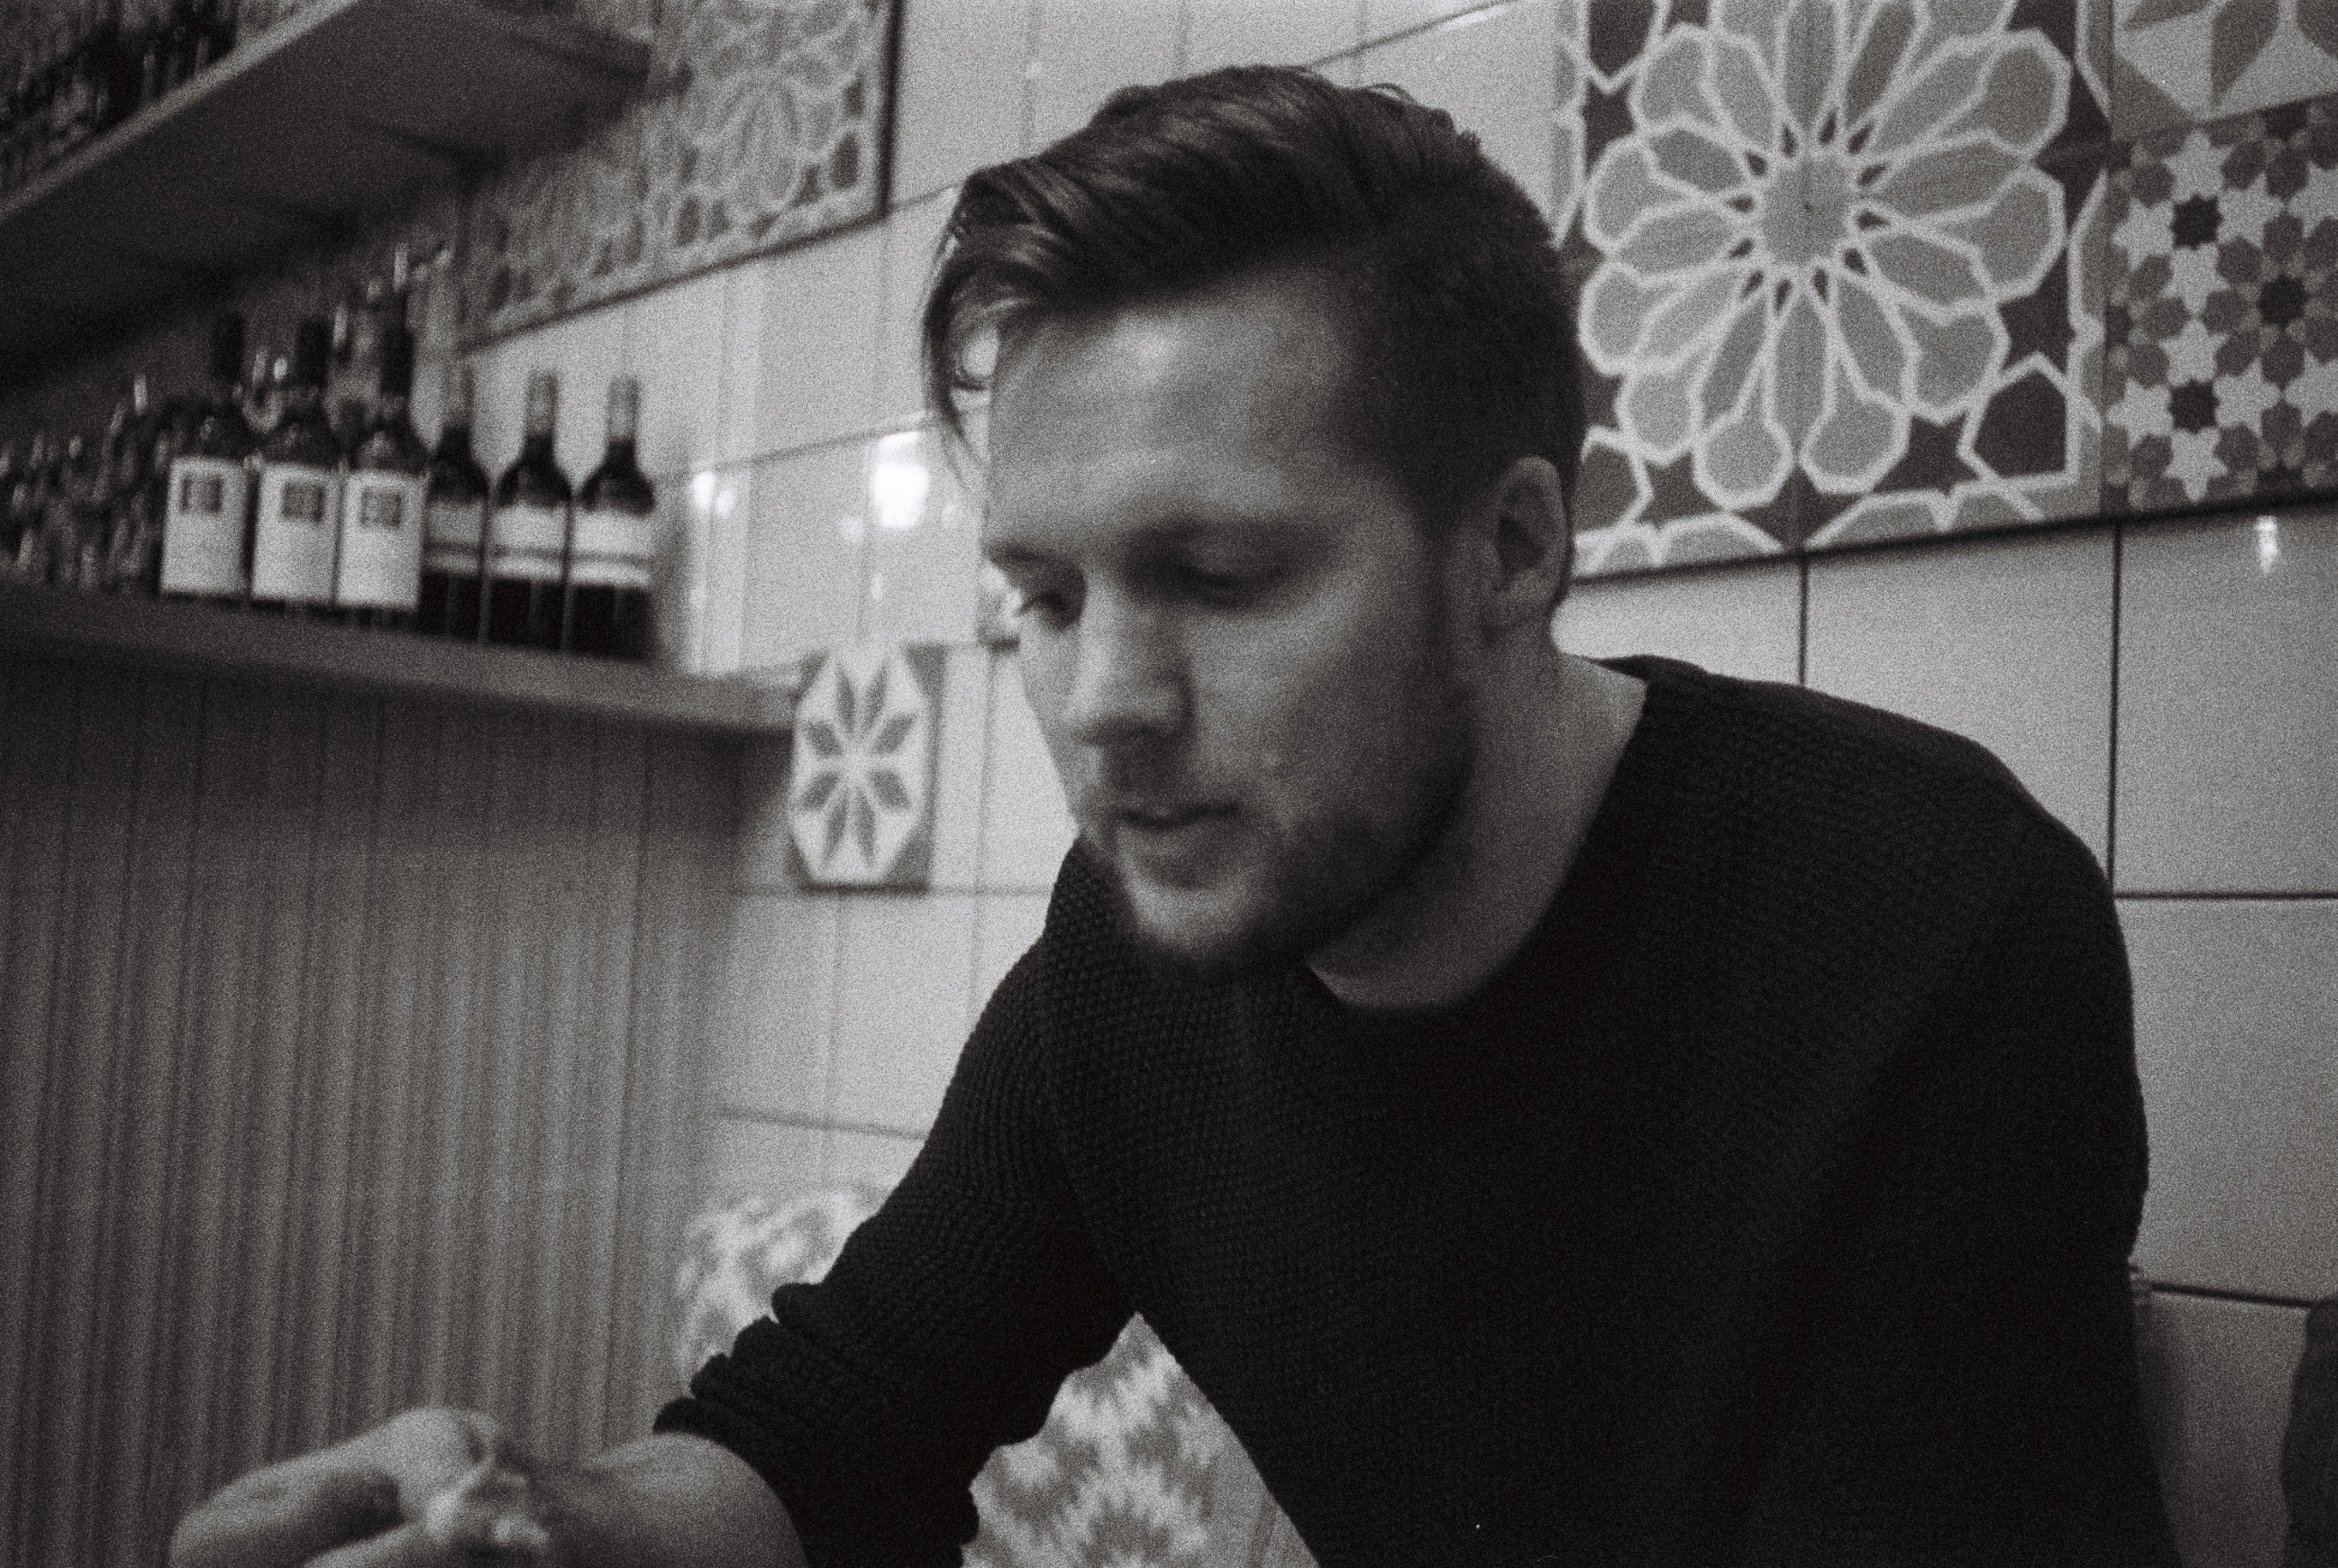 A black and white portrait of coxy (Matt Cox) sitting in front of a tiled wall in a cafe